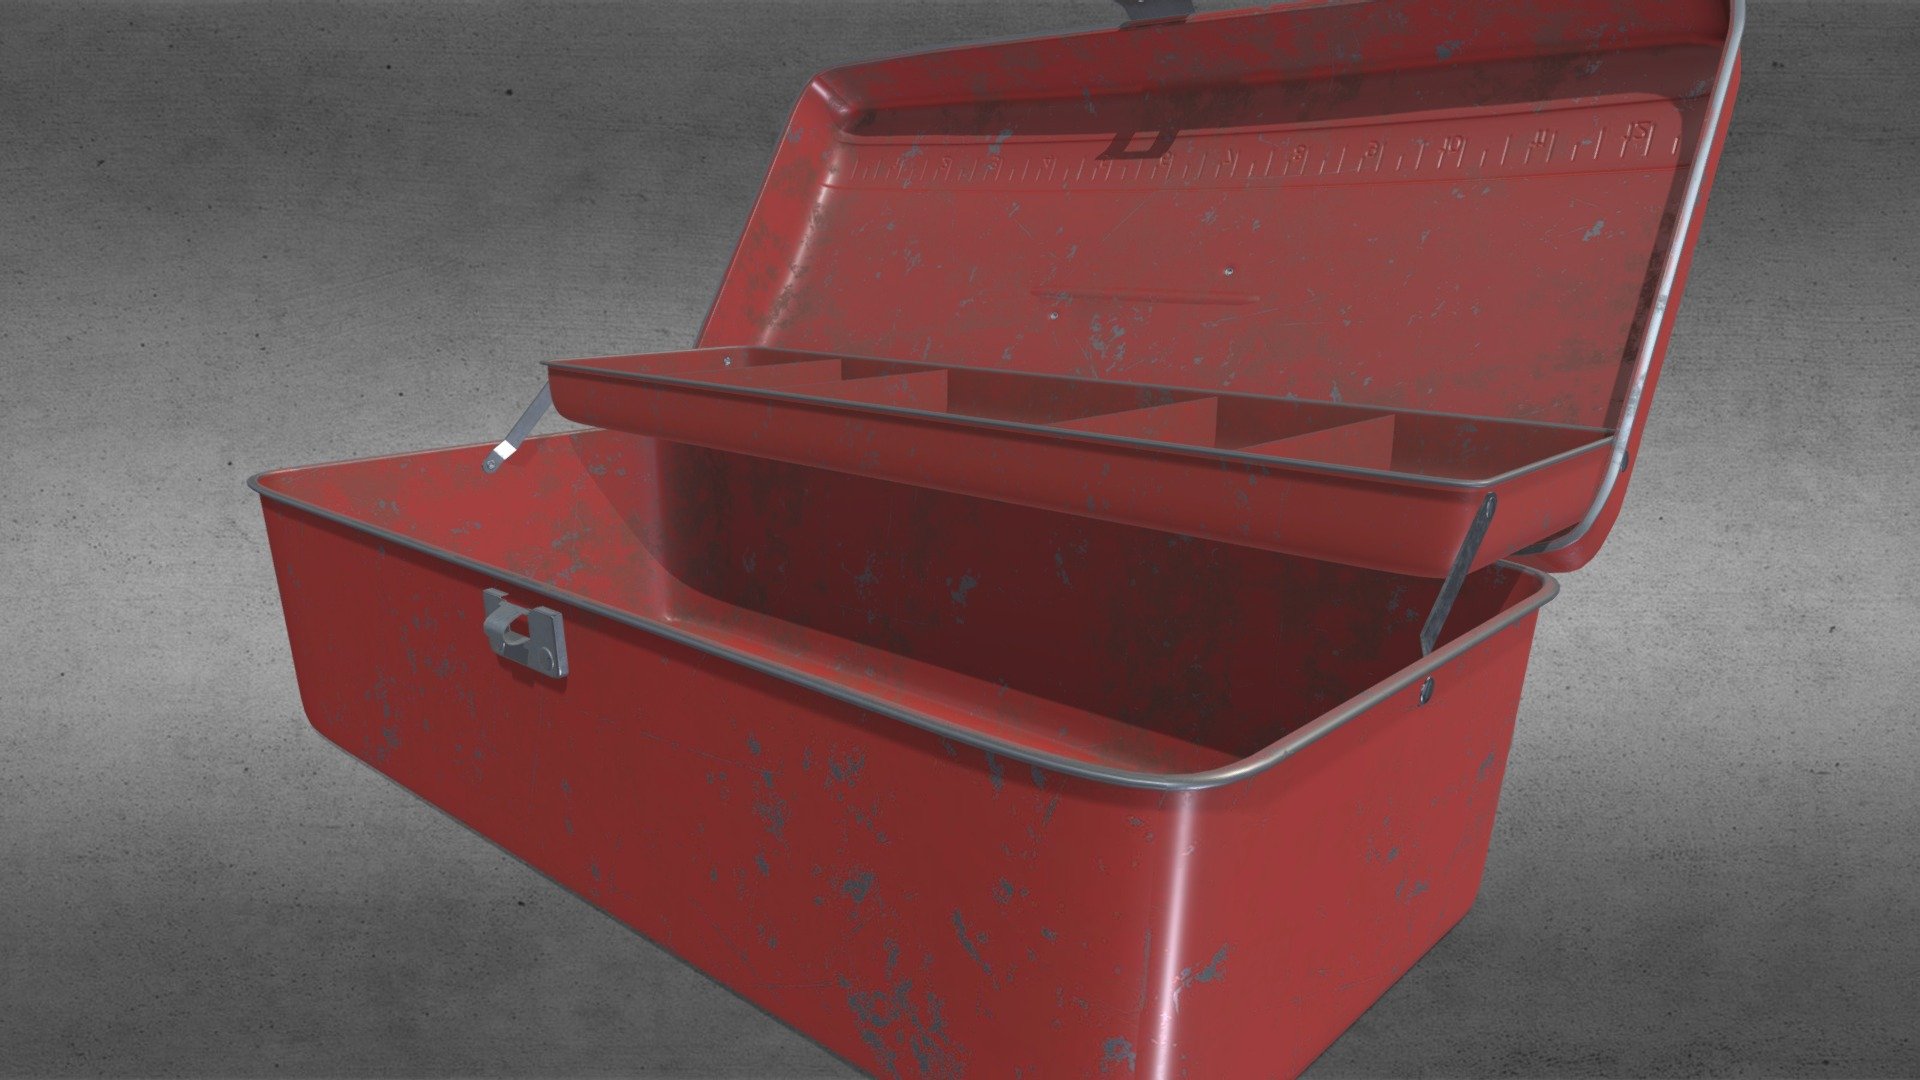 A metalic tackle box modeled in 3ds max and textured in substance painter
UNION LEROY N.Y. USA 13”, Marine red Metal Tackle Box Vintage
Good Rustic/Vintage Condition/ Small Flaw on Right Back of Lid, Shown in Last Photo
Wonderful Patina, Rust, Scratches, Dings, Dents, Paint Lose Handle &amp; Latch Both Work Fine, No Lock
Top of Box Has Embossed 12” Rule, 5” Height, 6” Depth, Length is 13” - Metalic fishing tackle box - Buy Royalty Free 3D model by mili.aiesecer 3d model